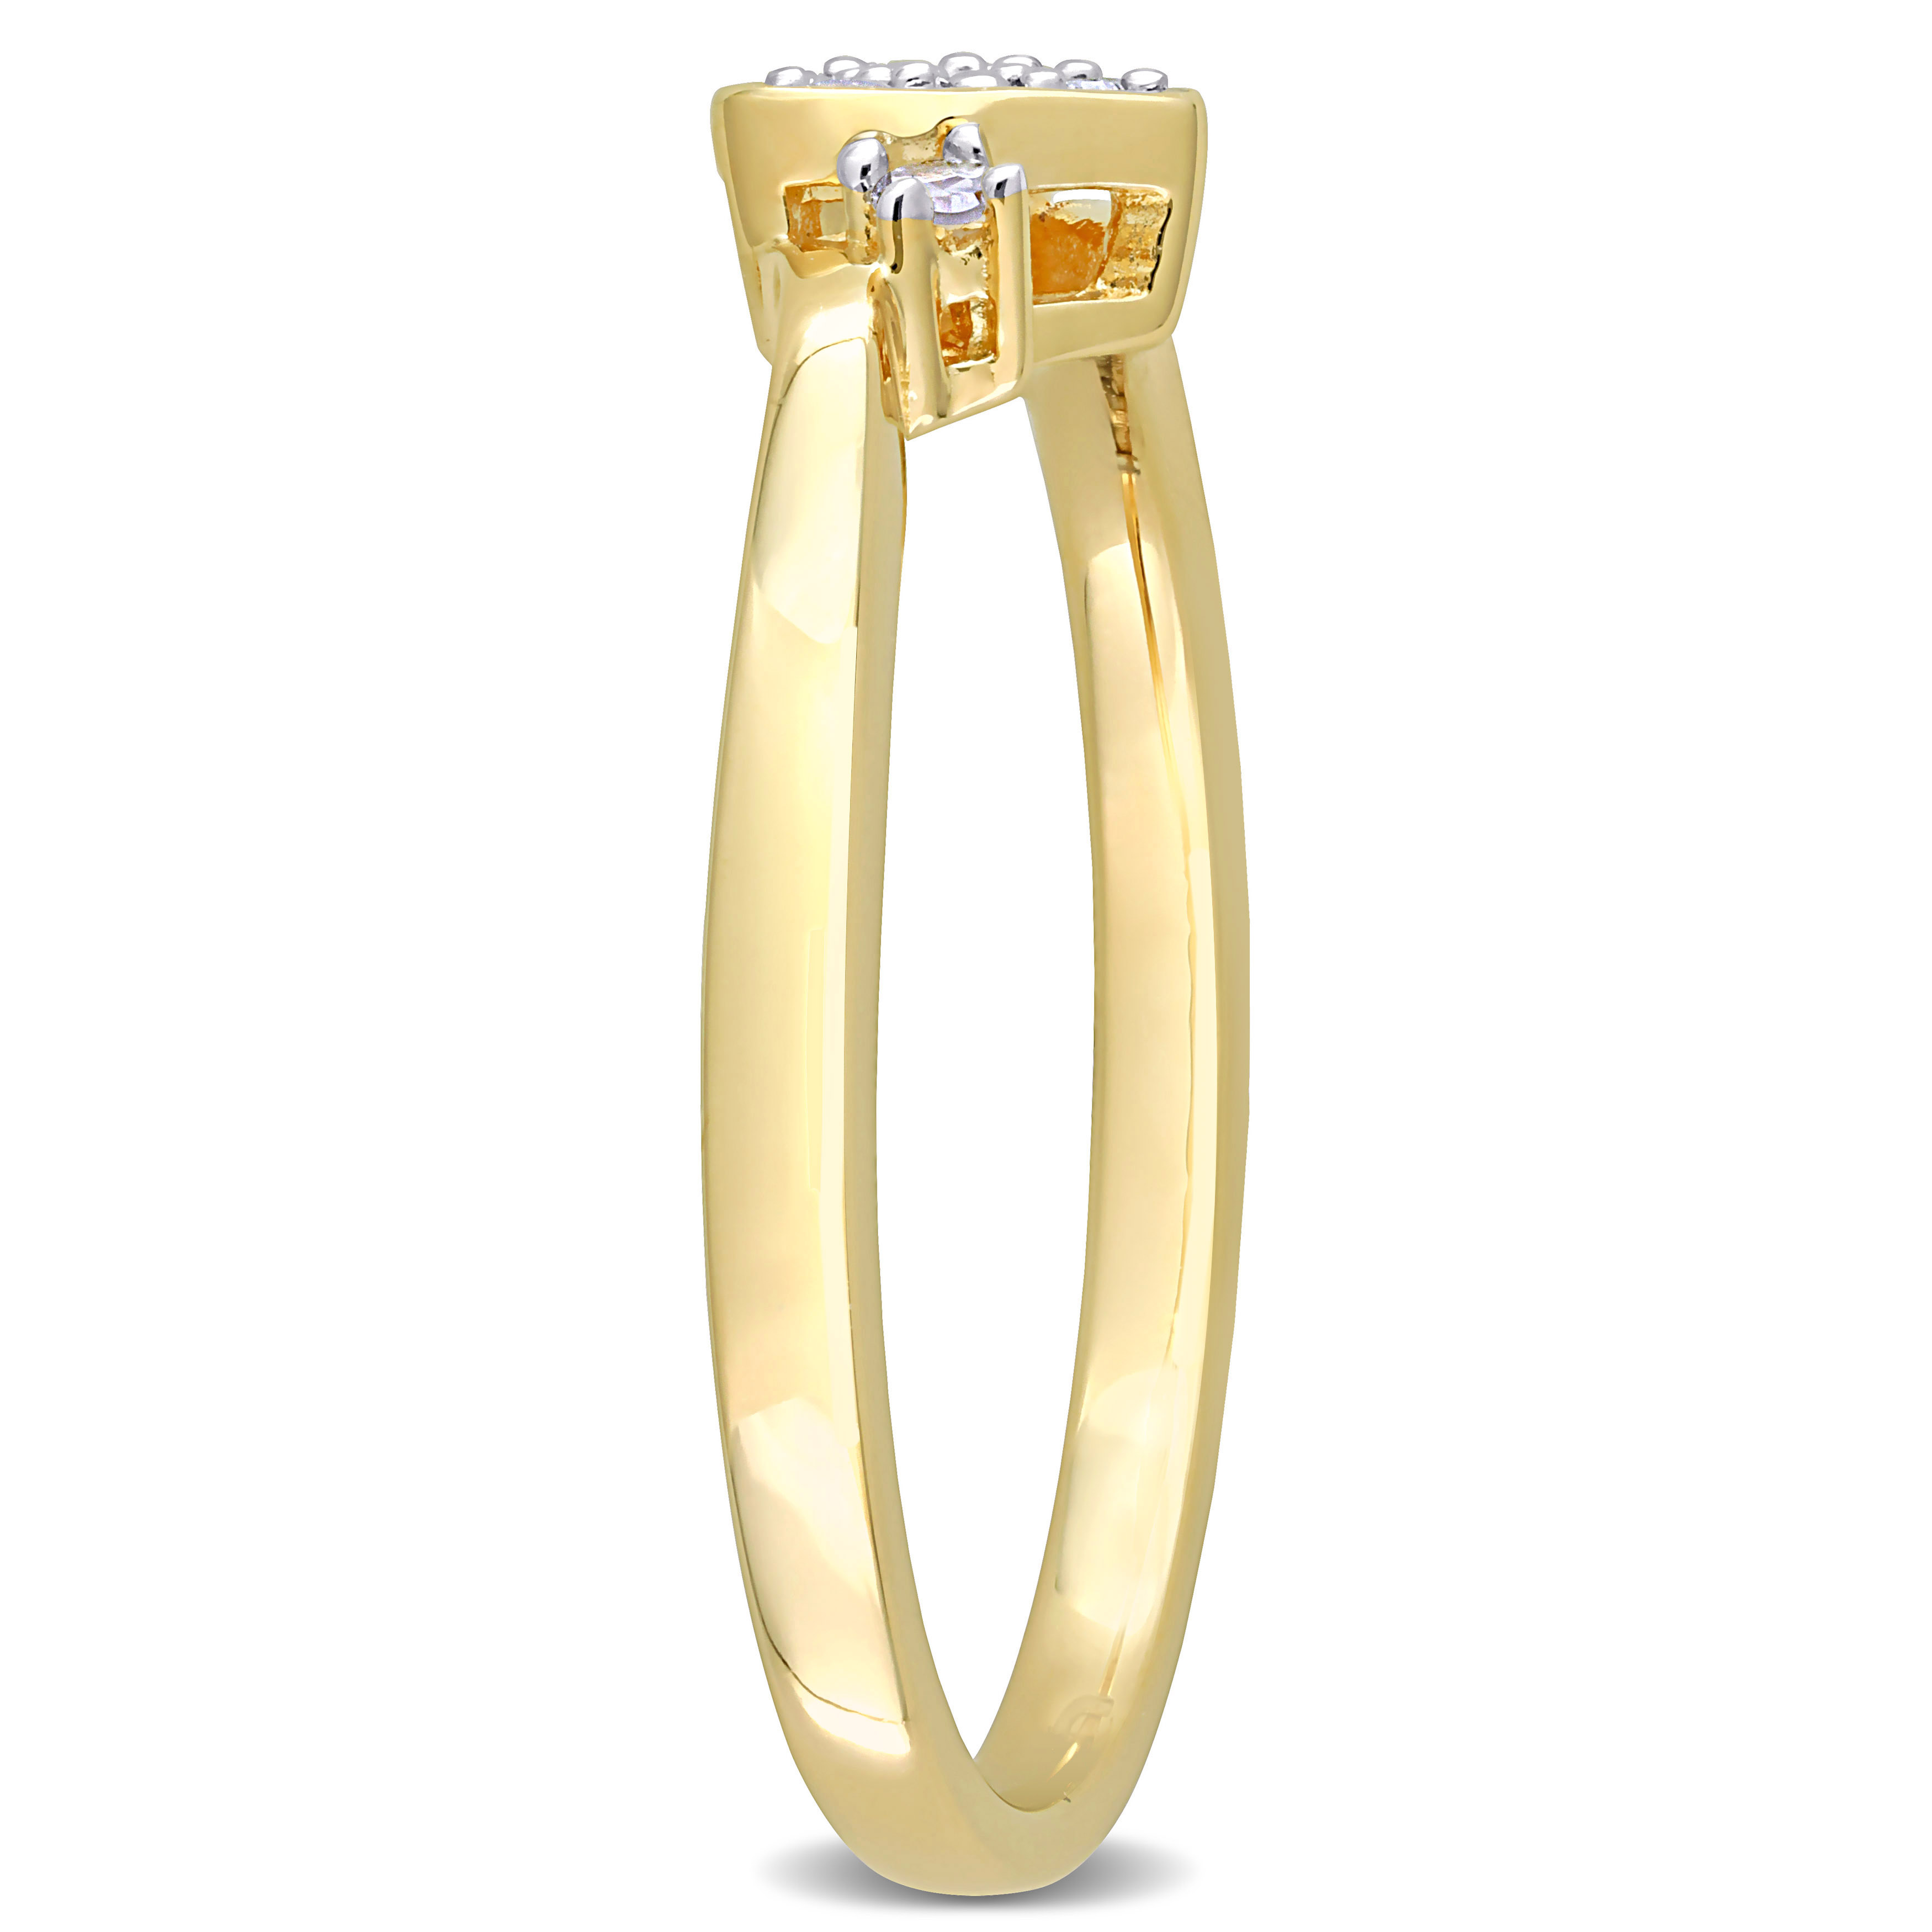 1/10 CT TDW Diamond Heart Ring in Yellow Plated Sterling Silver